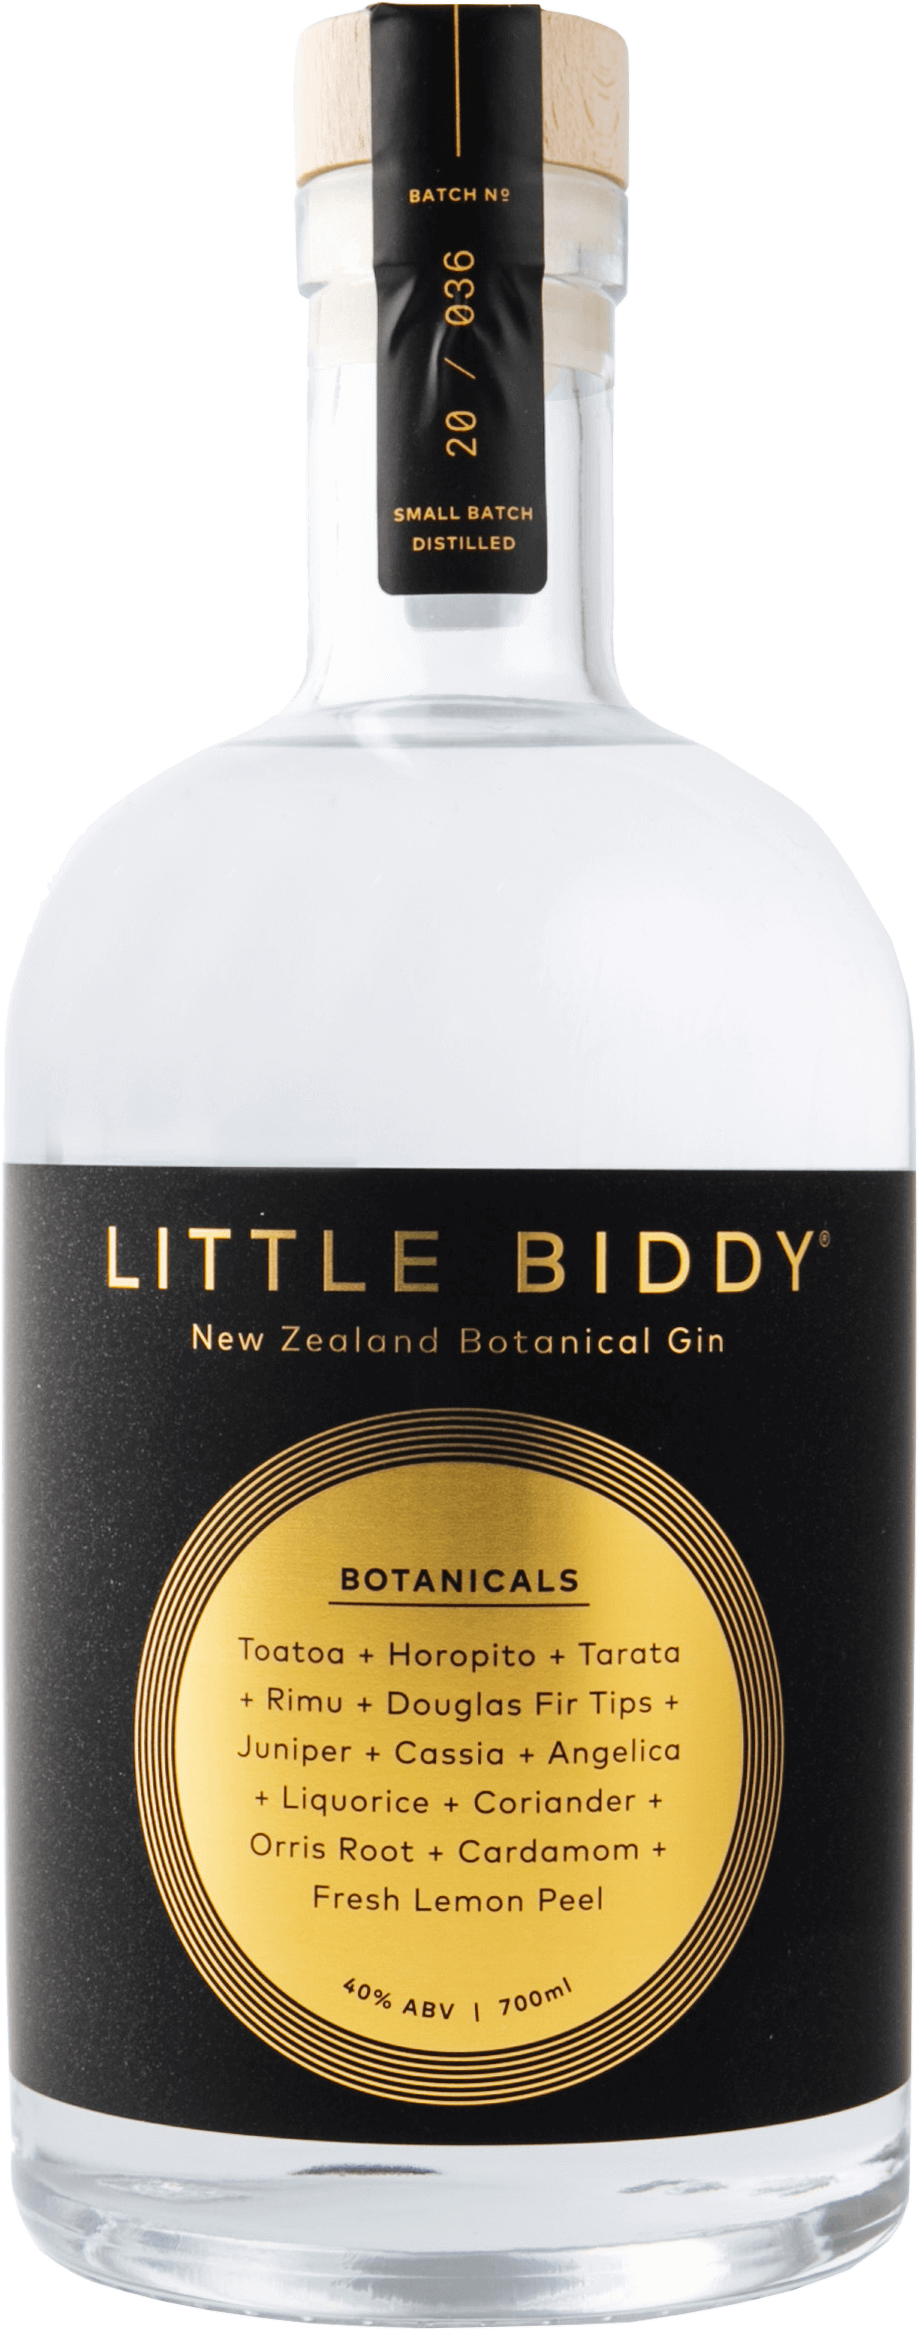 An image of a bottle of Little Biddy Classic Gin by Reefton Distilling Co. A Kiwi favourite gin.